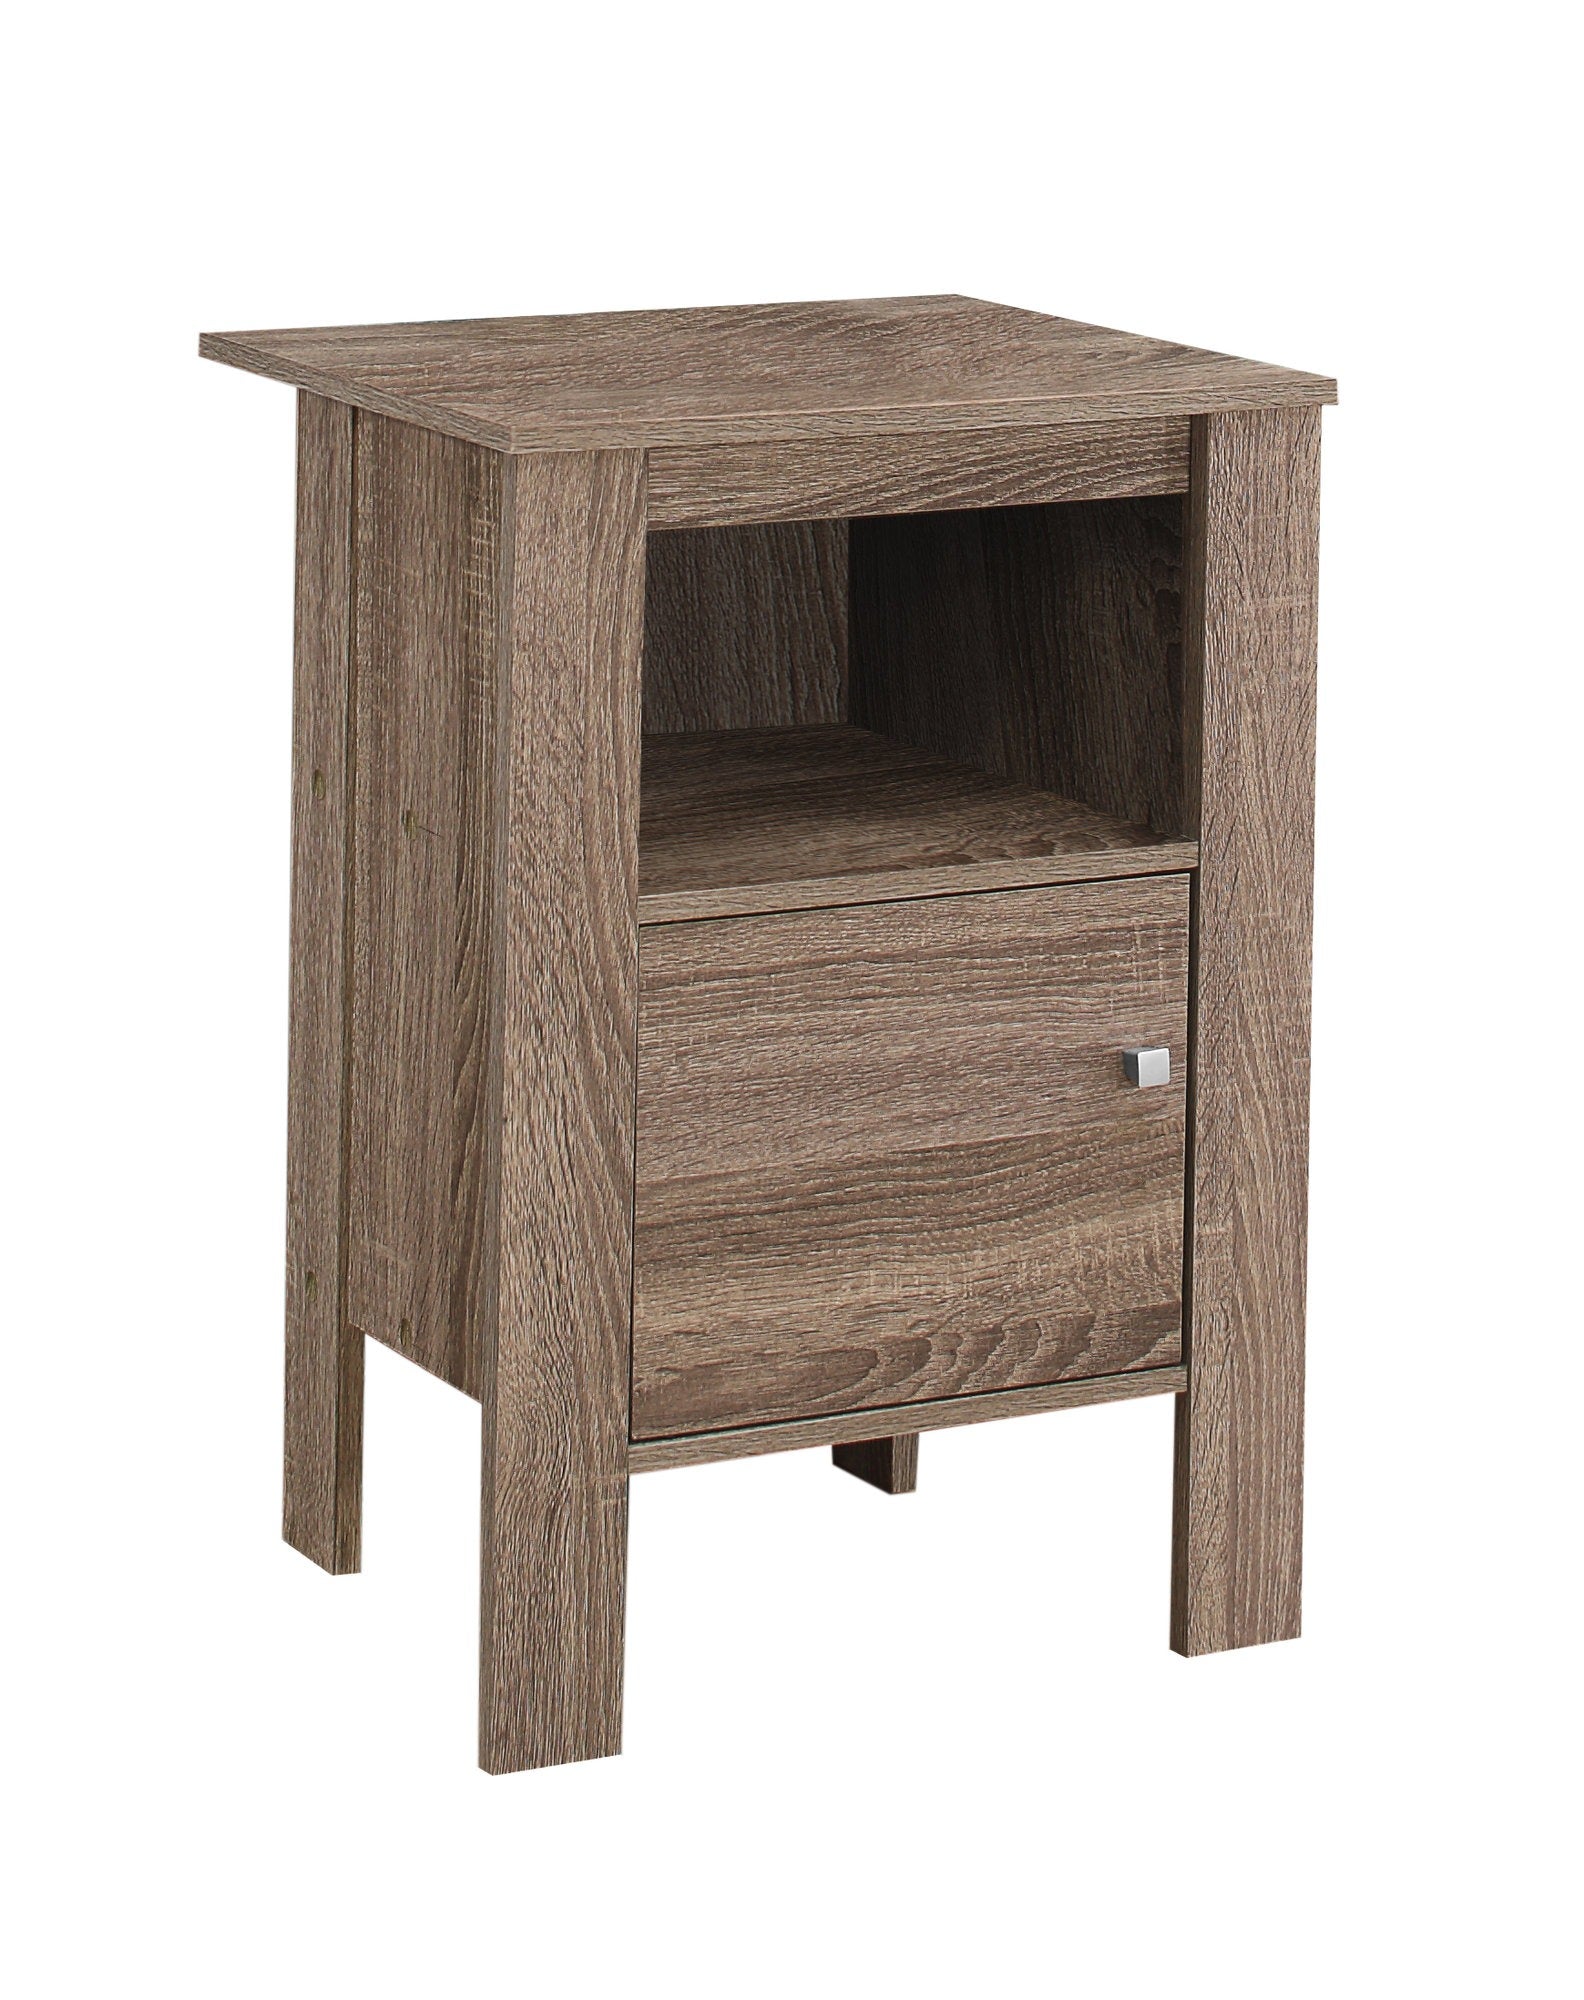 ACCENT TABLE - BLACK / GREY TOP NIGHT STAND WITH STORAGE